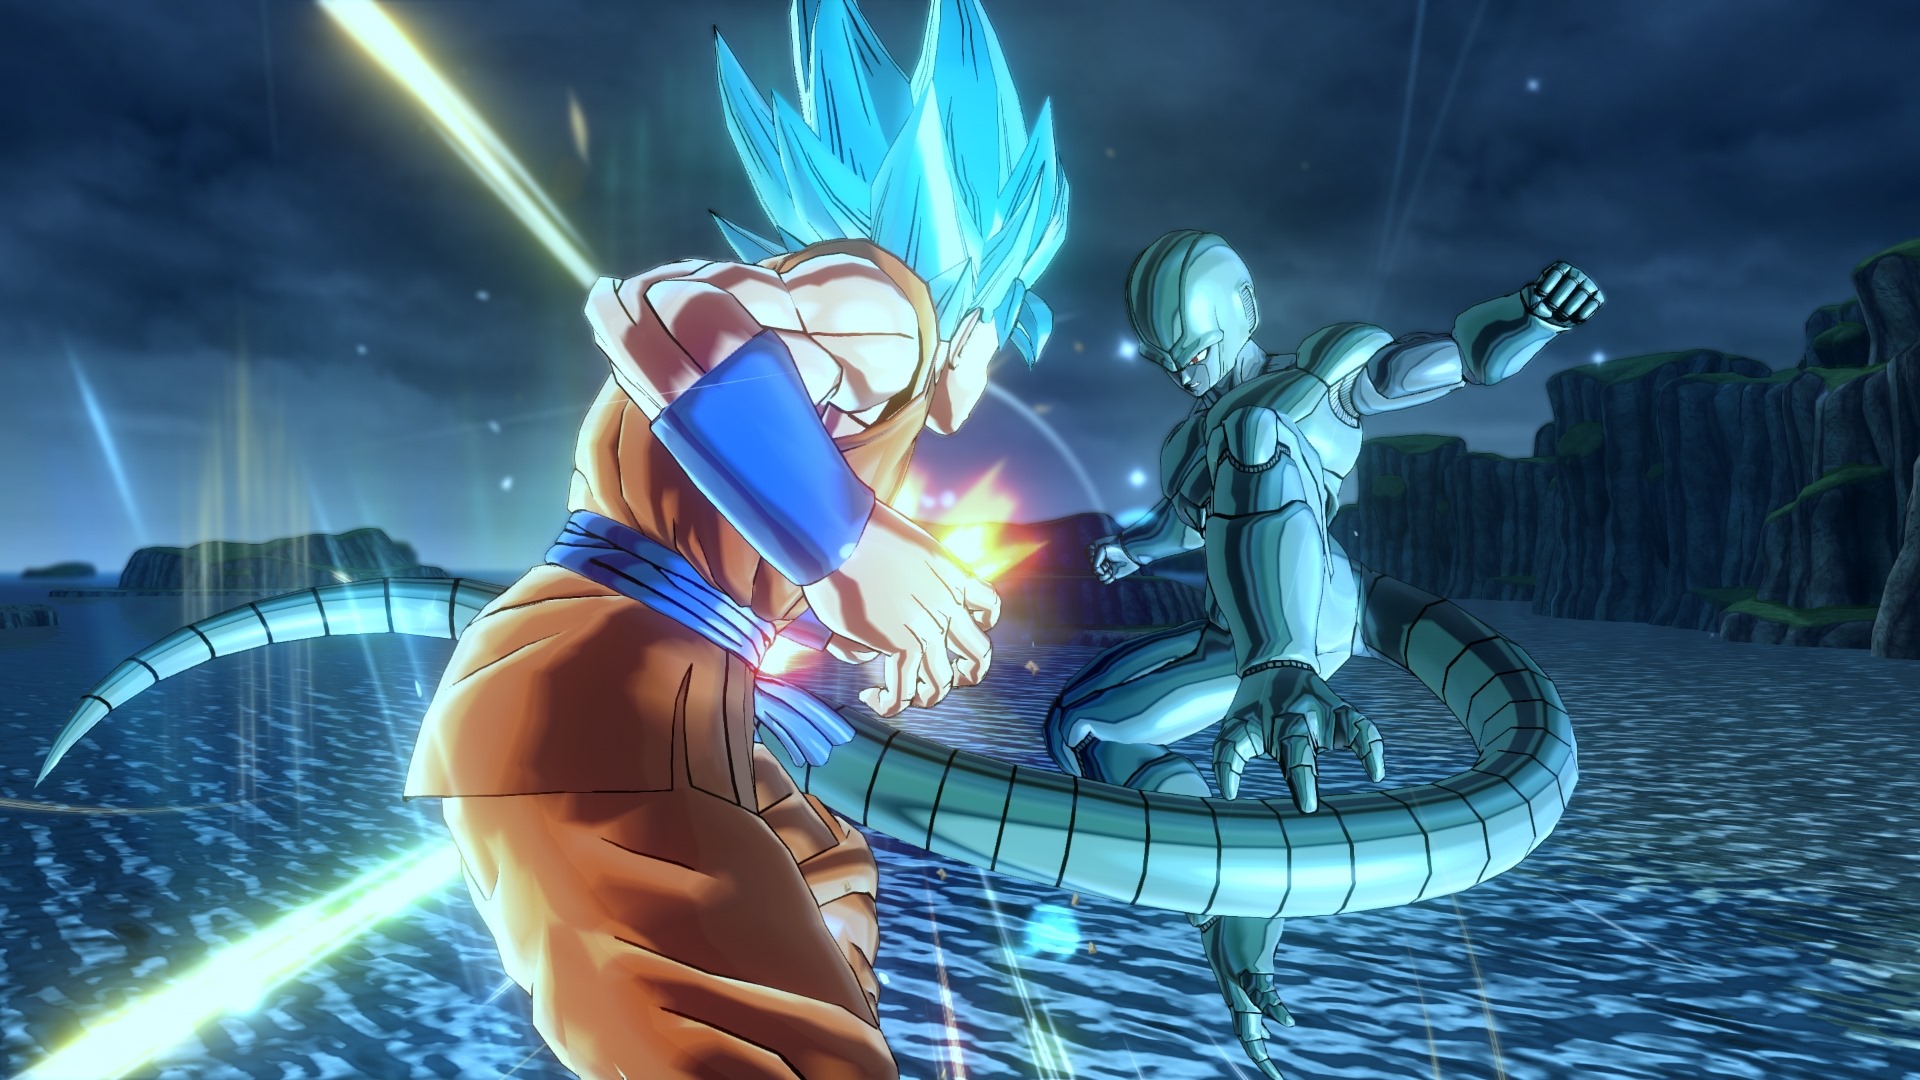 Dragon Ball Xenoverse 2 Screens Show Characters Delivering Milk And Hunting  Turtle Stones - Siliconera